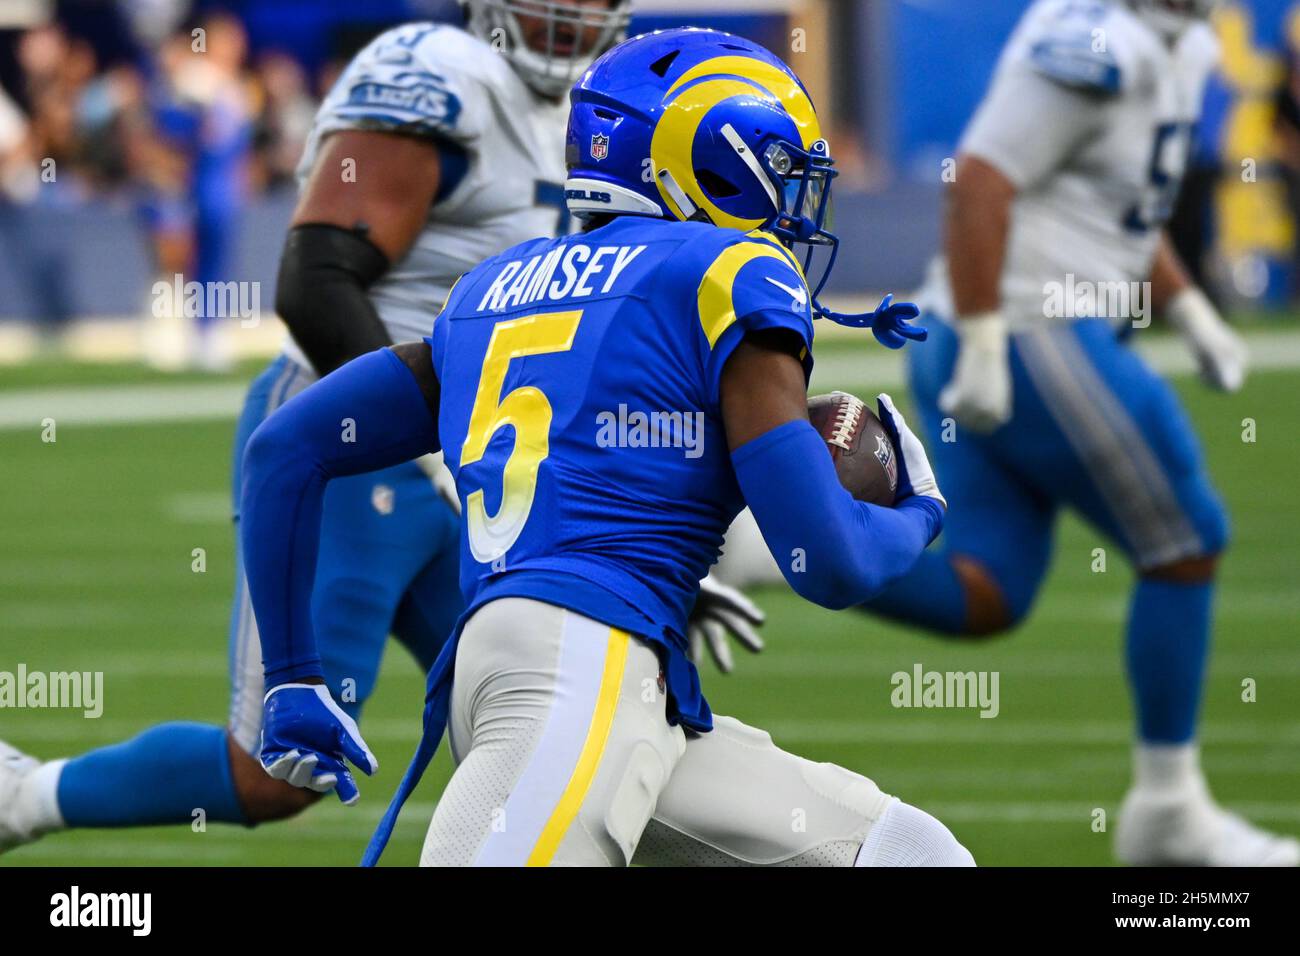 Los Angeles, United States. 24th Oct, 2021. Los Angeles Rams cornerback Jalen Ramsey (5) during an NFL game against the Detroit Lions, Sunday, Oct. 24, 2021, in Los Angeles. The Rams defeated the Lions 28-19. (Dylan Stewart/Image of Sport) Photo via Credit: Newscom/Alamy Live News Stock Photo